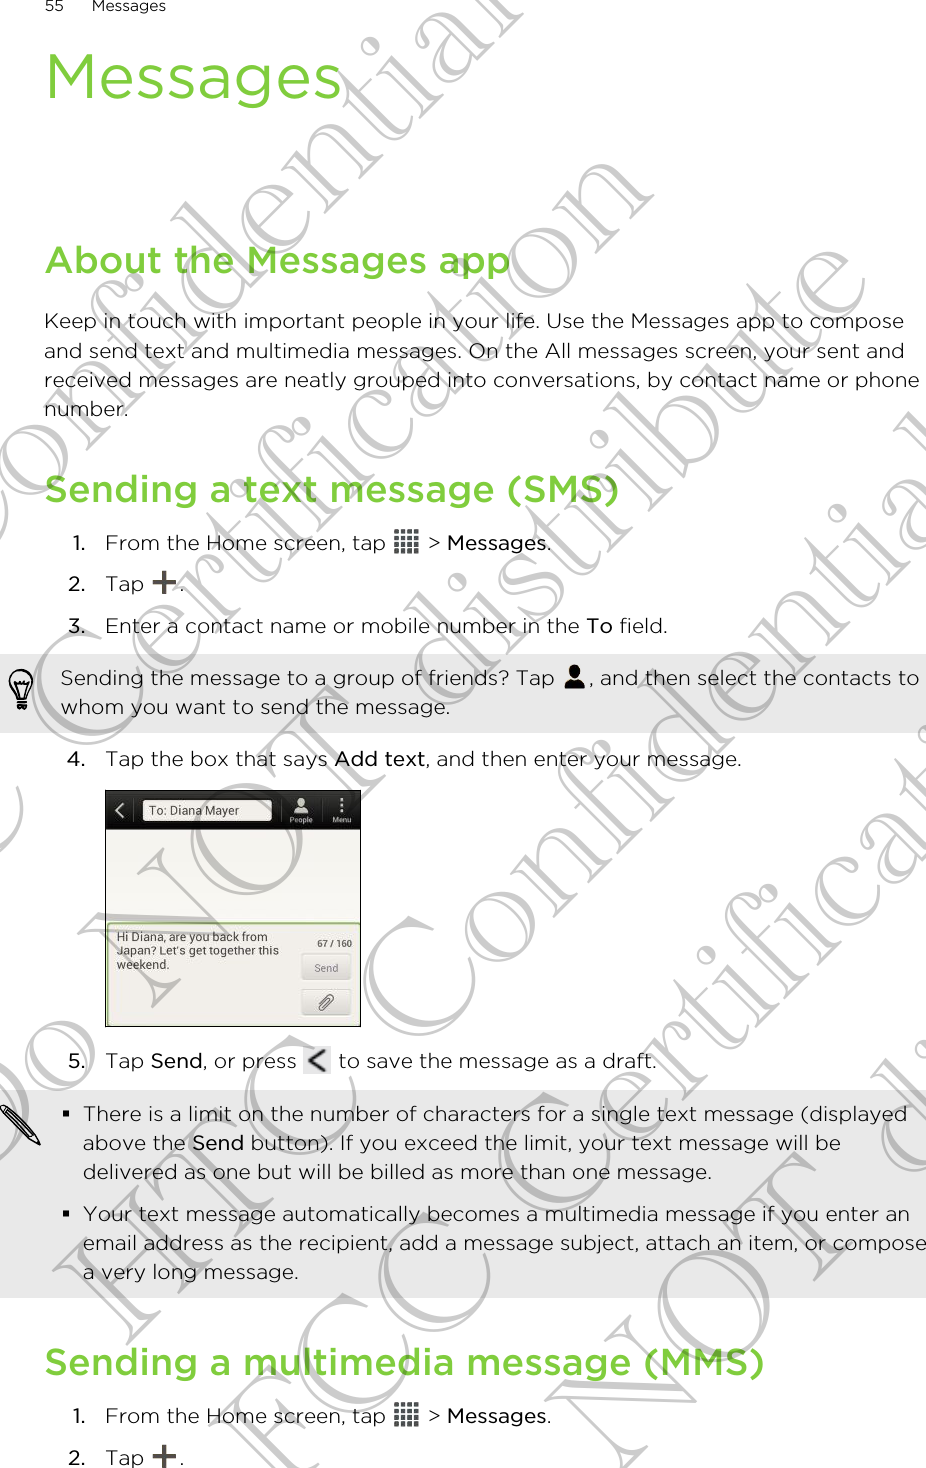 MessagesAbout the Messages appKeep in touch with important people in your life. Use the Messages app to composeand send text and multimedia messages. On the All messages screen, your sent andreceived messages are neatly grouped into conversations, by contact name or phonenumber.Sending a text message (SMS)1. From the Home screen, tap   &gt; Messages.2. Tap  .3. Enter a contact name or mobile number in the To field. Sending the message to a group of friends? Tap  , and then select the contacts towhom you want to send the message.4. Tap the box that says Add text, and then enter your message. 5. Tap Send, or press   to save the message as a draft. §There is a limit on the number of characters for a single text message (displayedabove the Send button). If you exceed the limit, your text message will bedelivered as one but will be billed as more than one message.§Your text message automatically becomes a multimedia message if you enter anemail address as the recipient, add a message subject, attach an item, or composea very long message.Sending a multimedia message (MMS)1. From the Home screen, tap   &gt; Messages.2. Tap  .55 MessagesHTC Confidential FCC Certification Do NOT distribute HTC Confidential FCC Certification Do NOT distribute